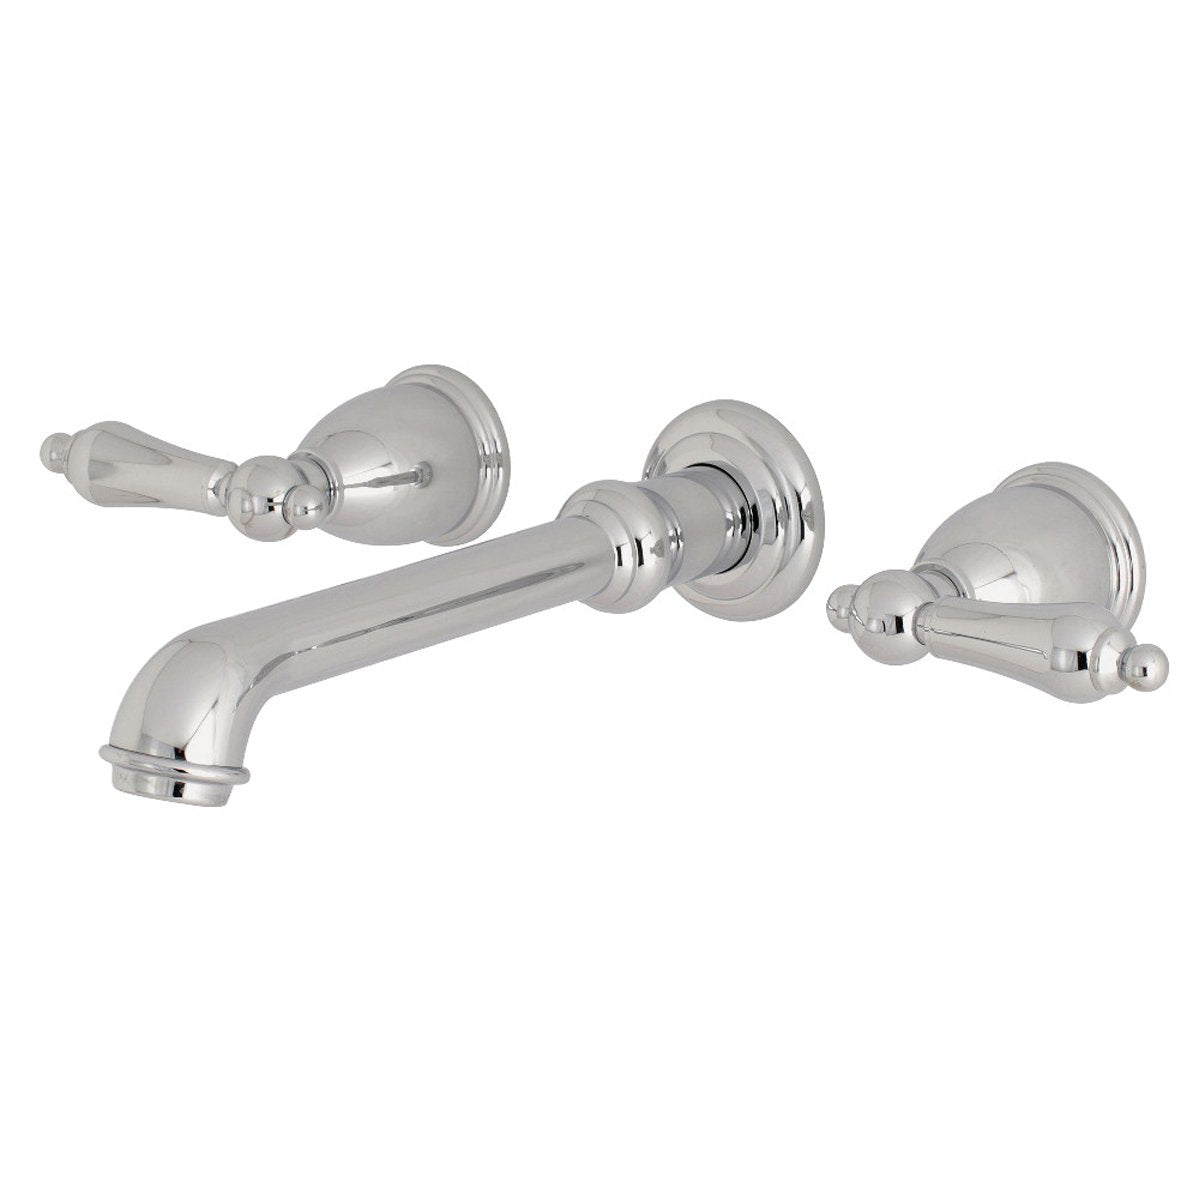 Kingston Brass English Country Wall Mount Bathroom Faucet